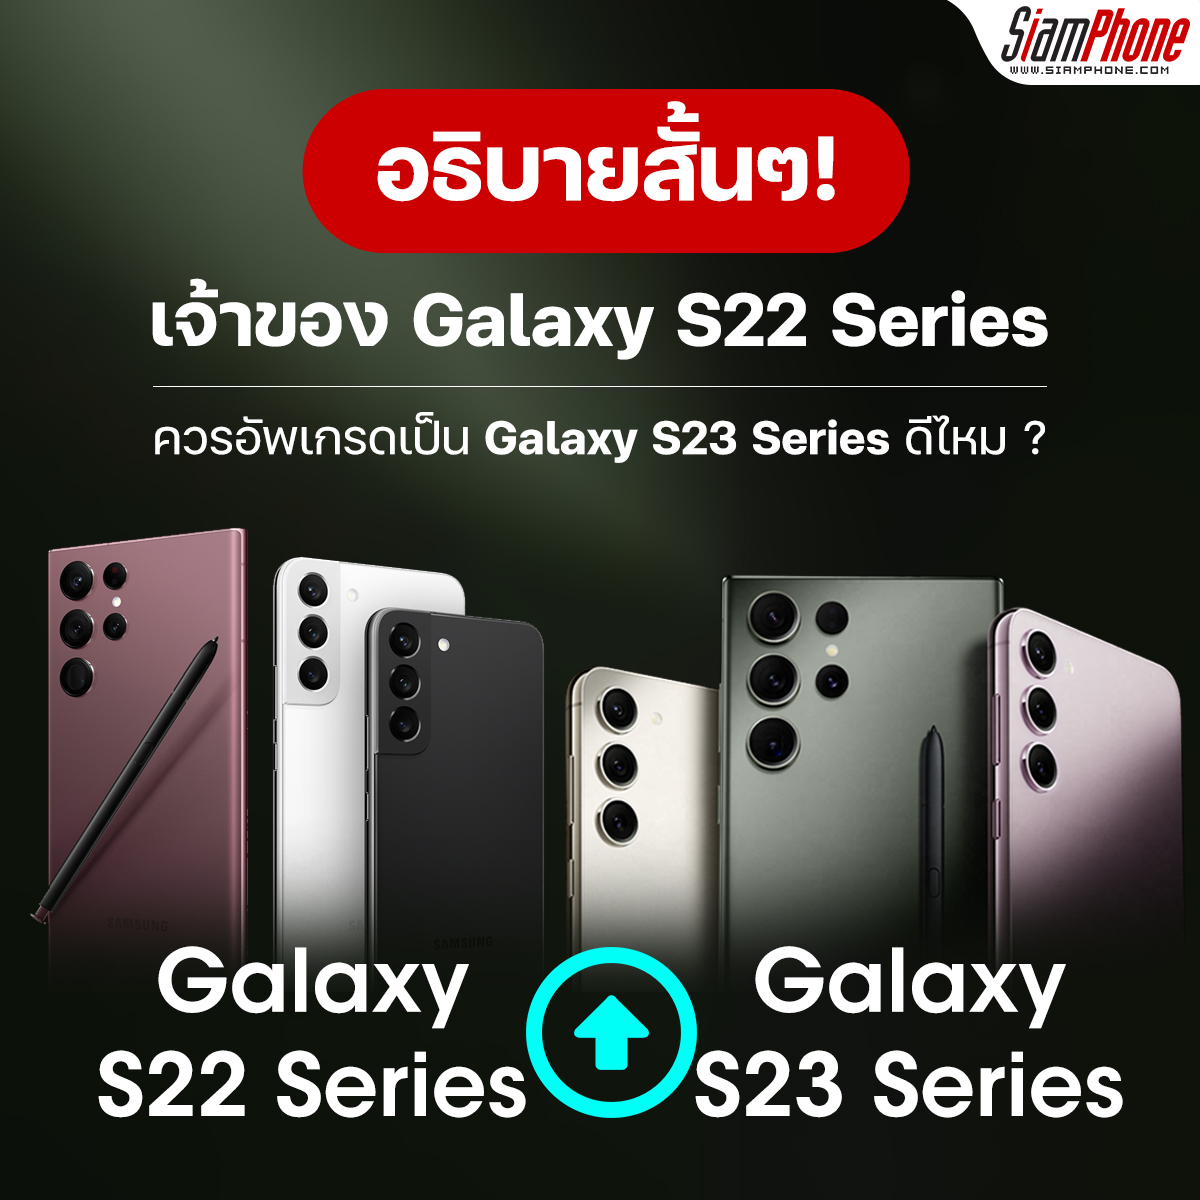 Briefly explain!  Owners of the Samsung Galaxy S22 Series should upgrade to the Samsung Galaxy S23 Series, should that be good?